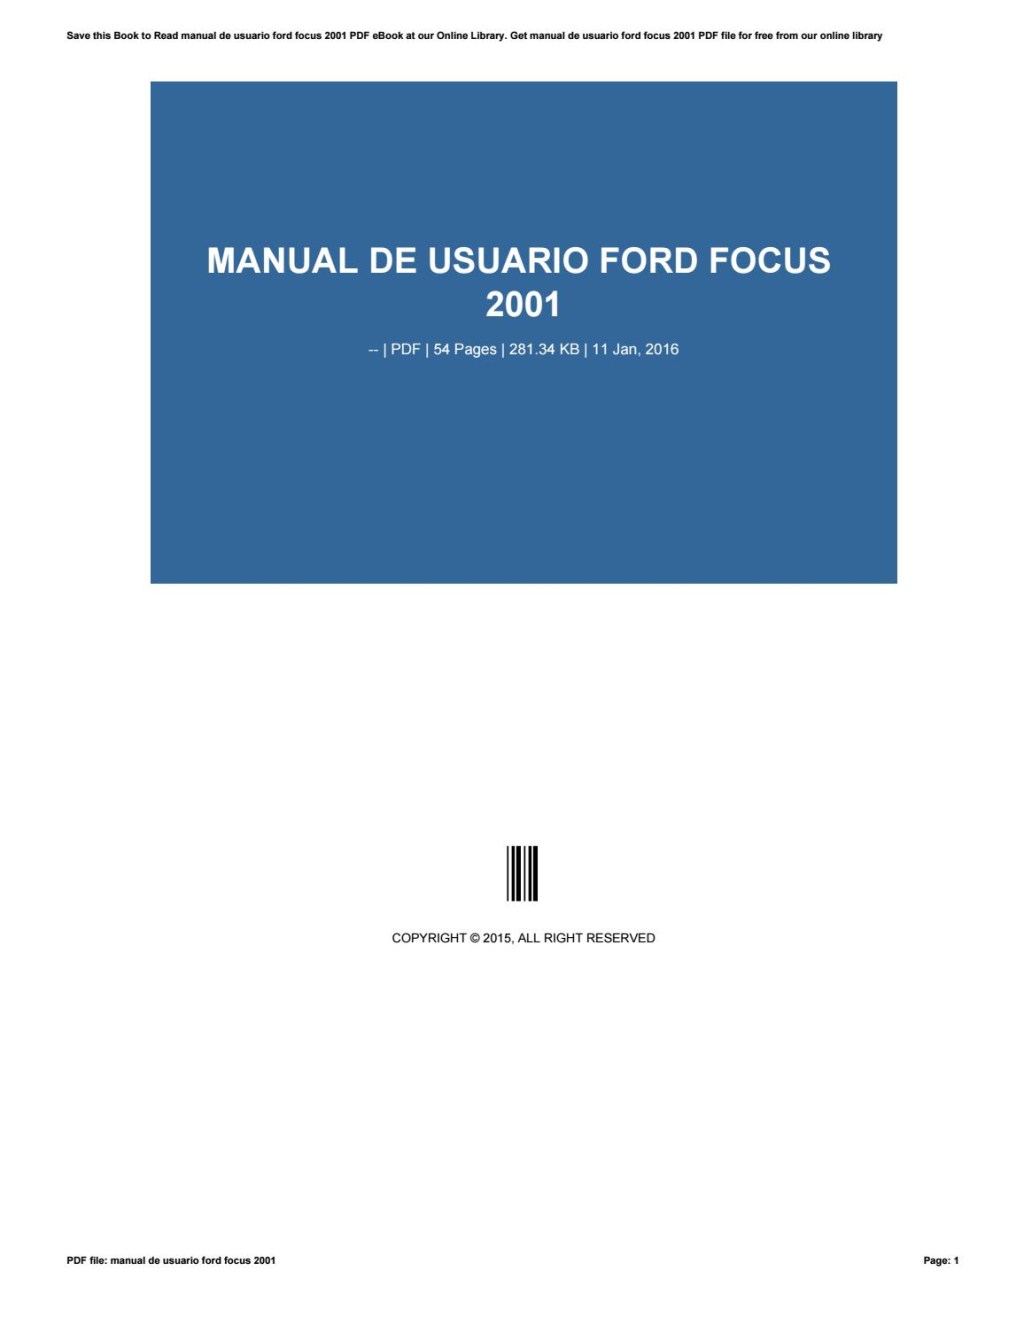 Picture of: Manual de usuario ford focus  by mail – Issuu